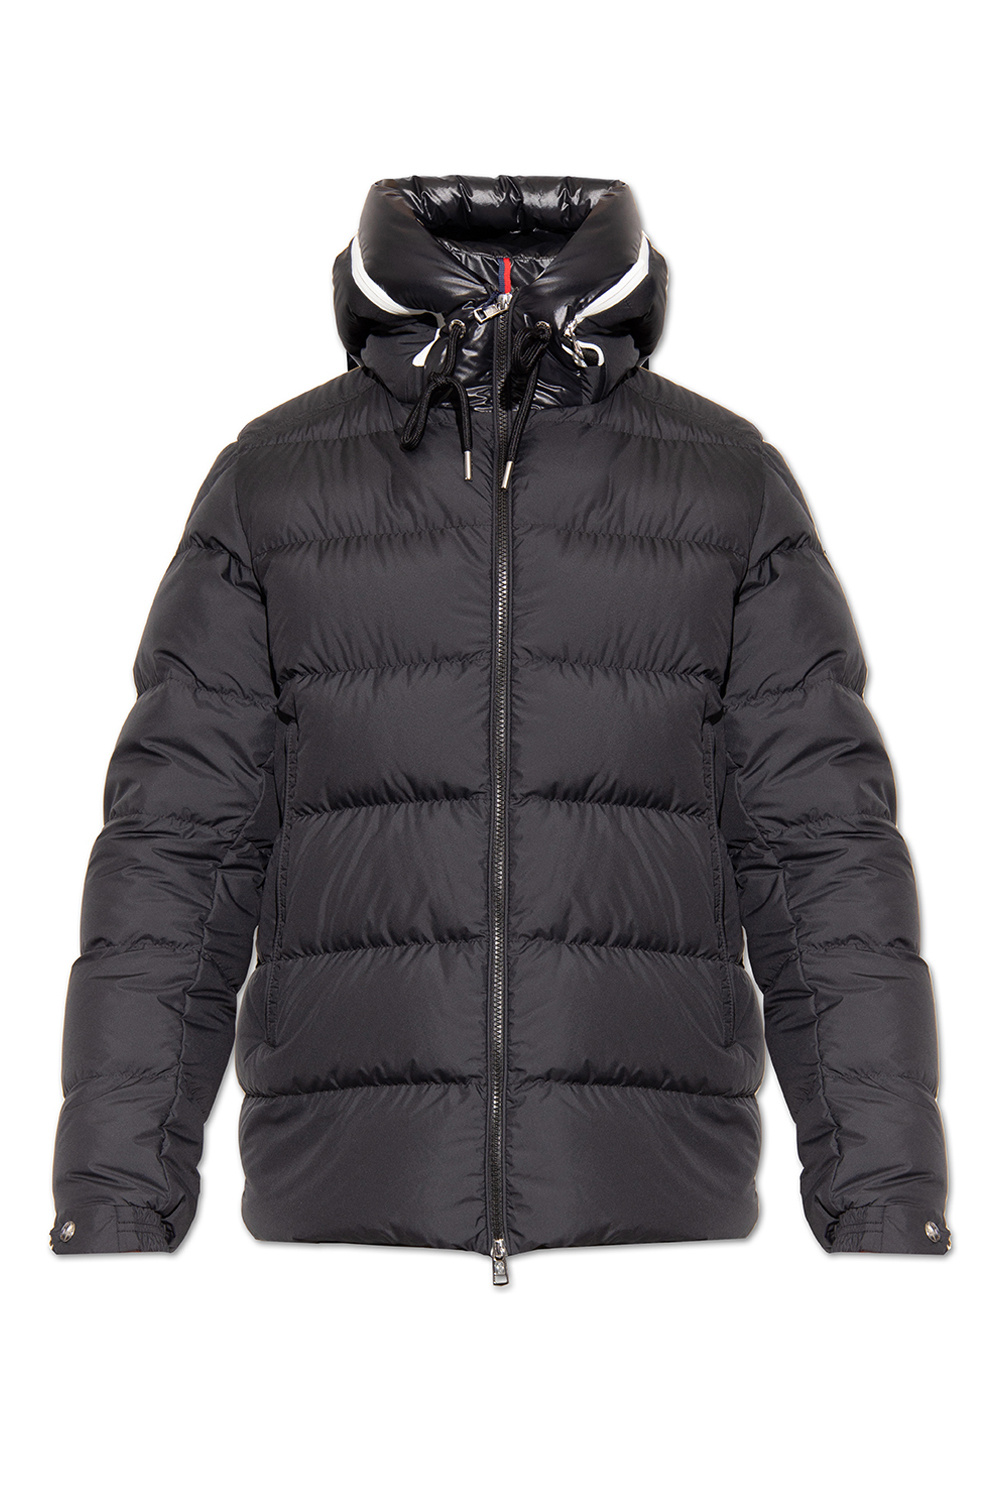 Black 'Cardere' hooded down jacket Moncler - IetpShops GB 